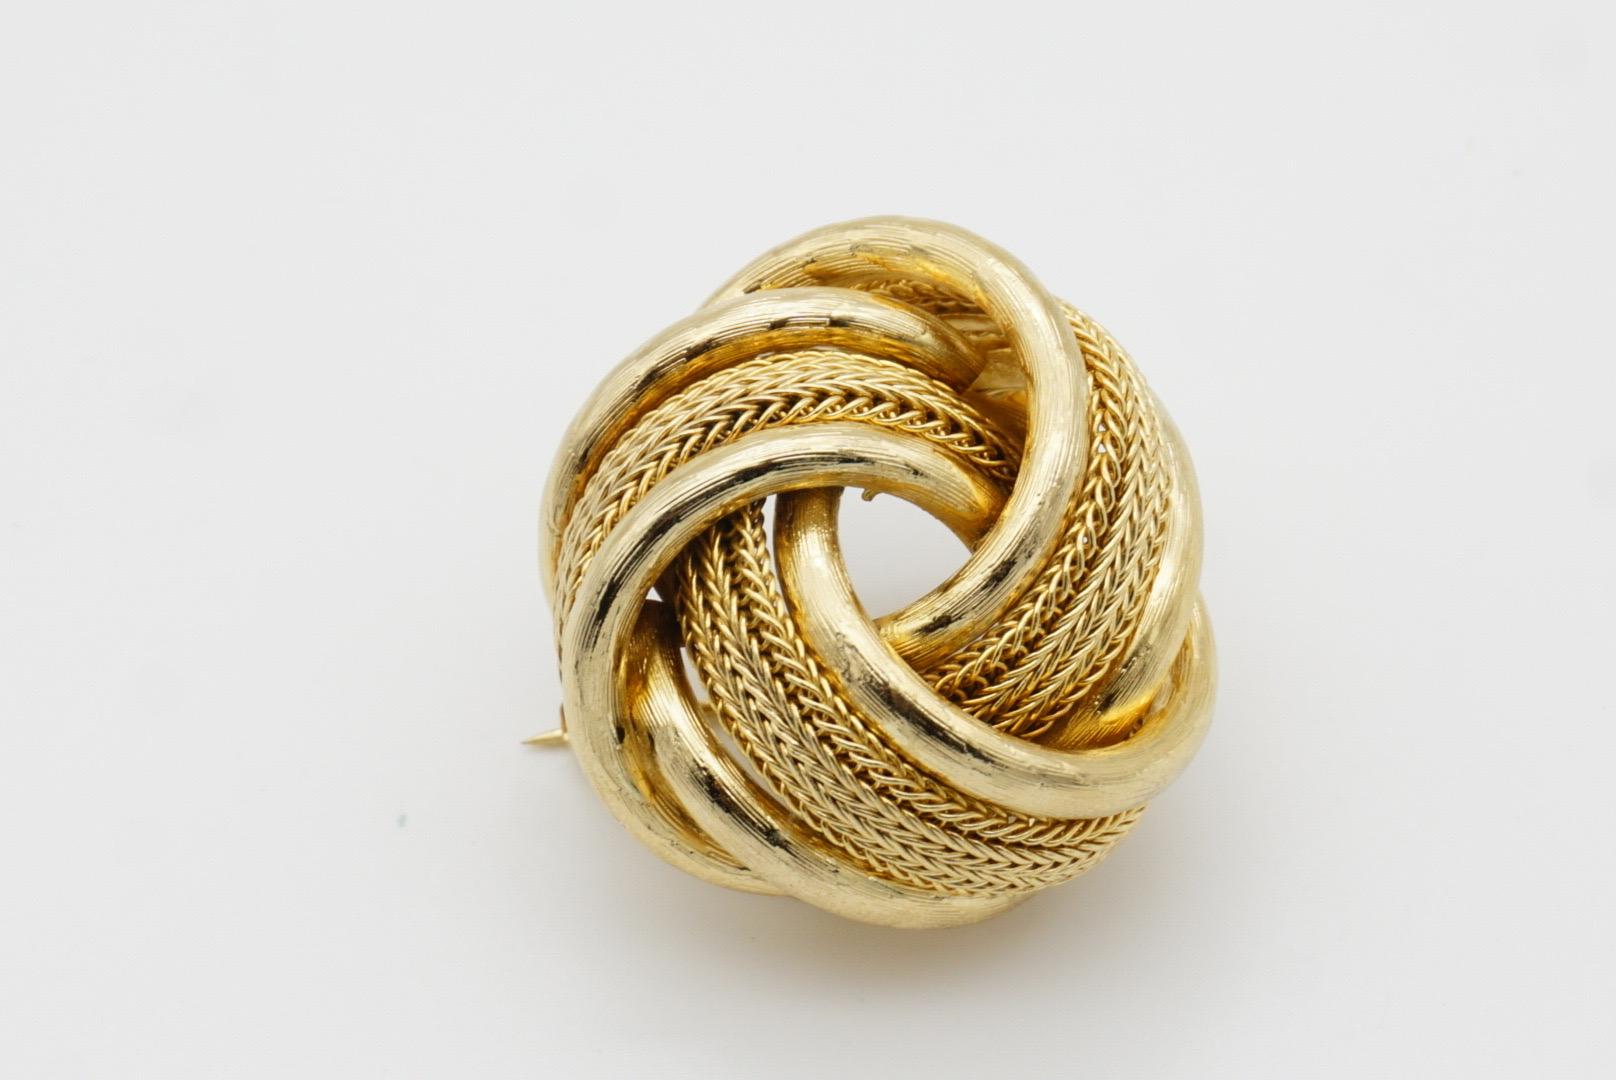 Christian Dior GROSSE 1963 Vintage Knot Rope Glow Mesh Swirl Twist Dome Brooch For Sale 4